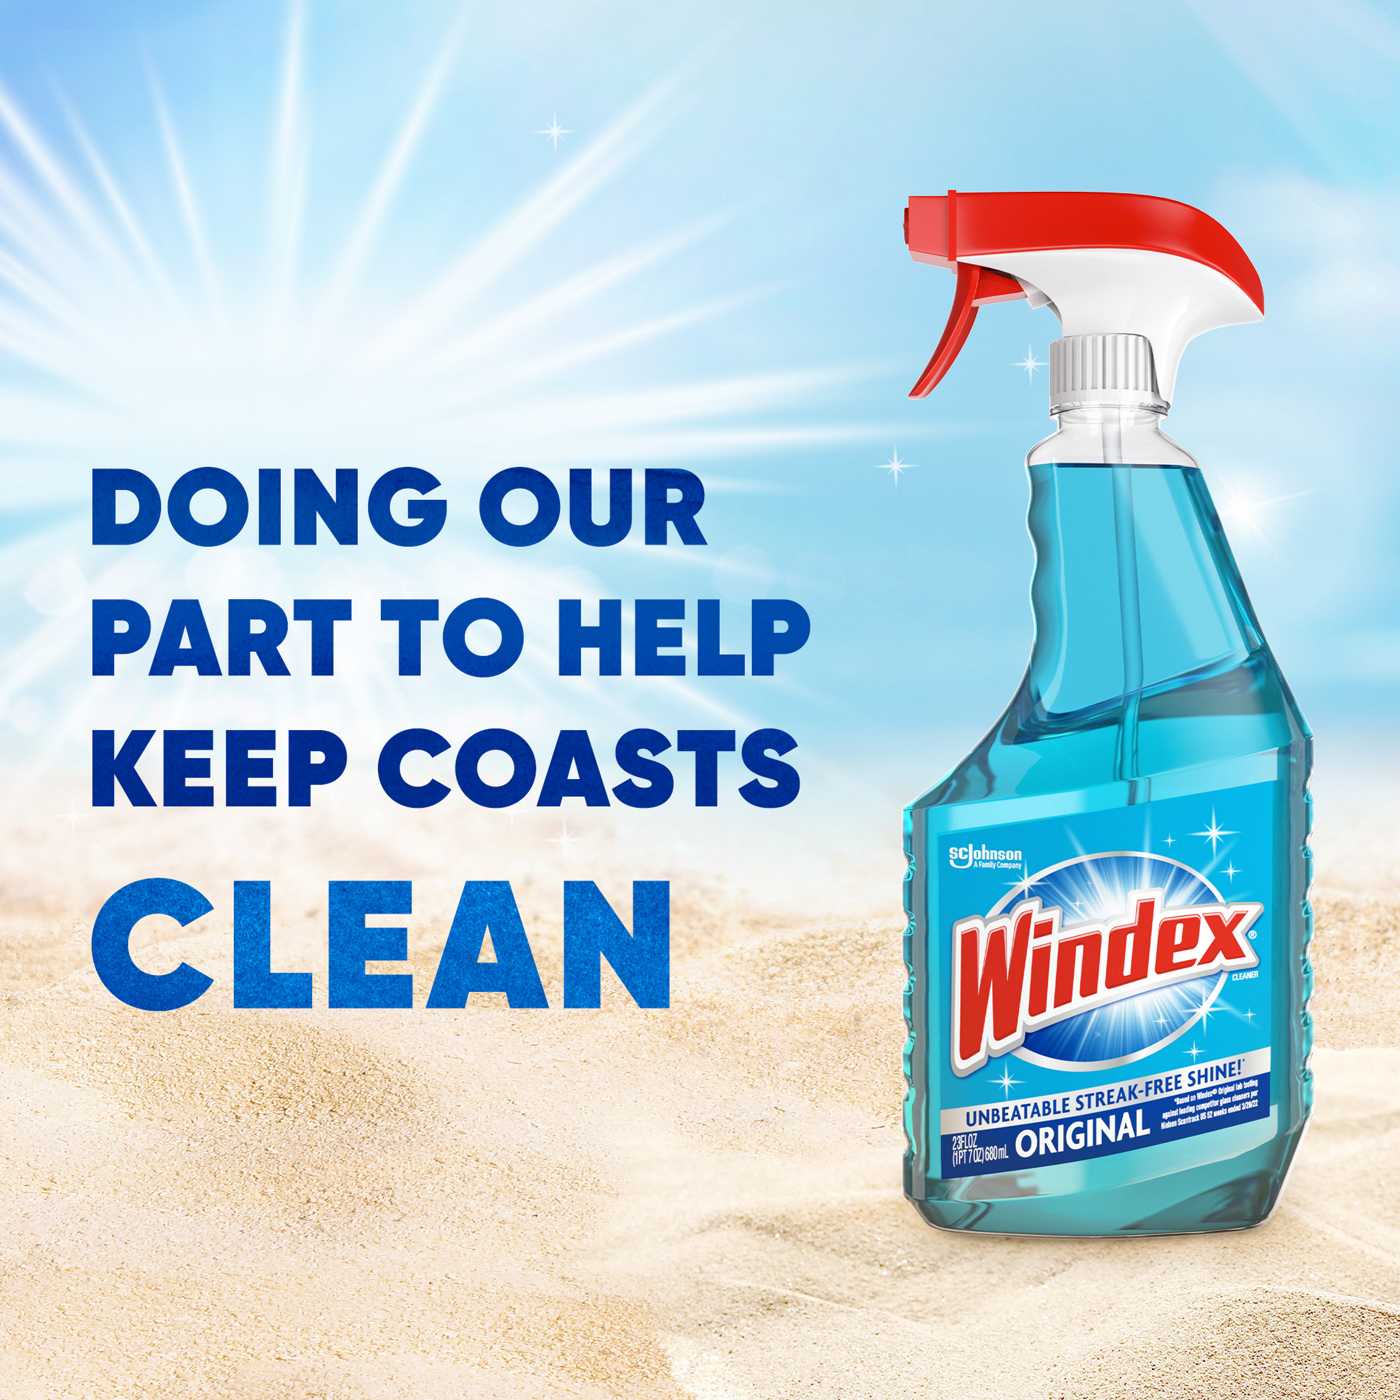 Windex Original Value Refill Glass Cleaner; image 8 of 9